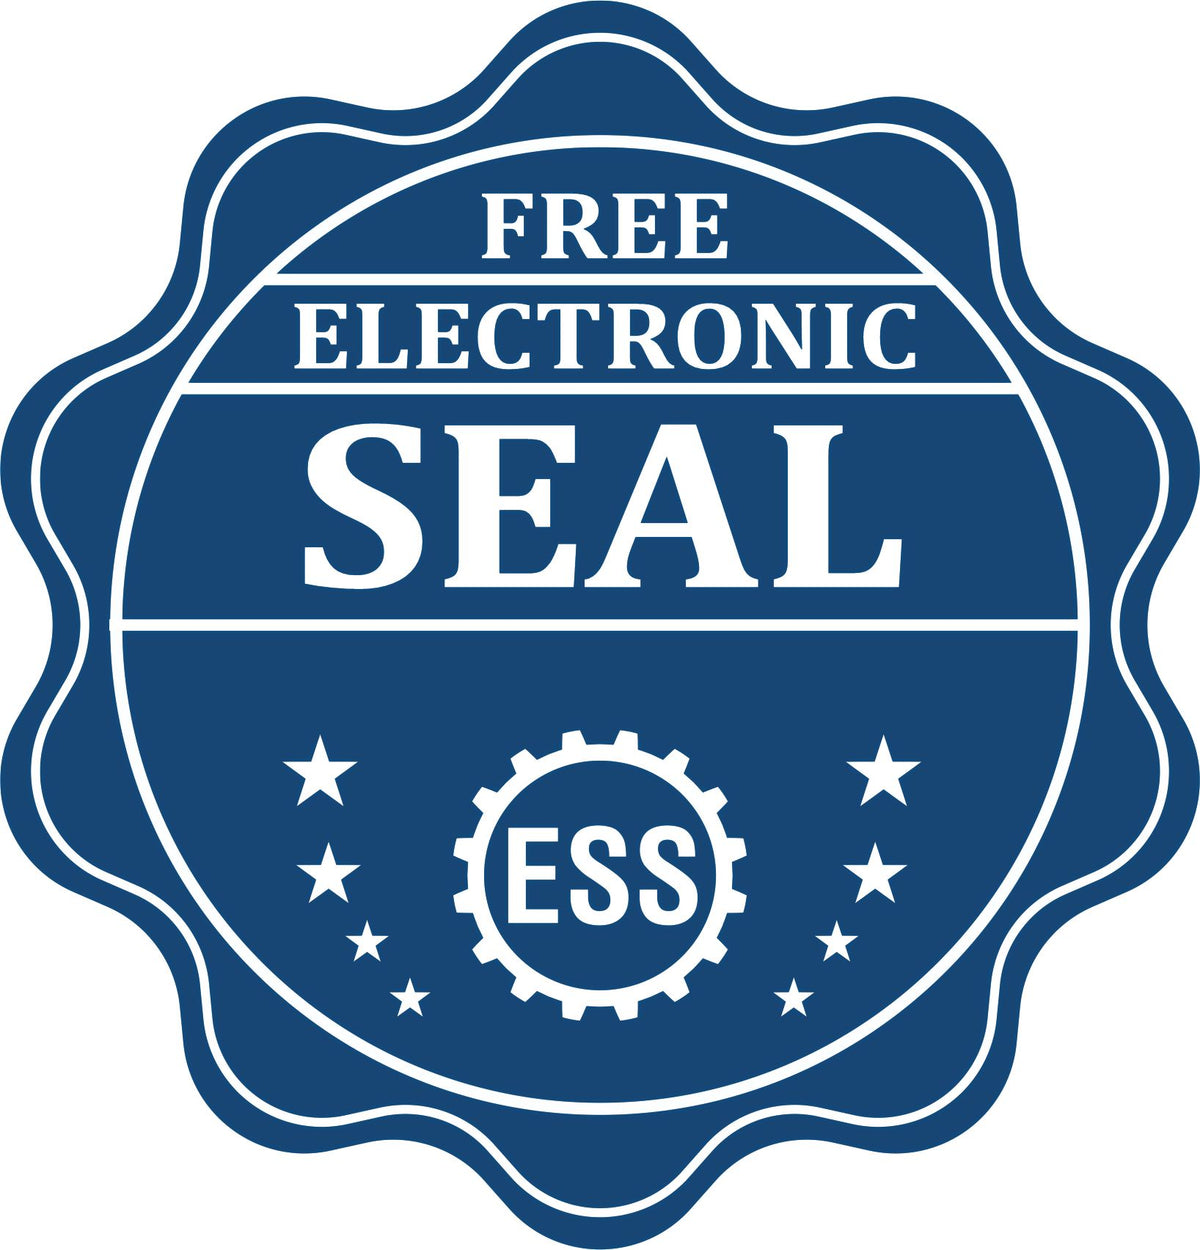 A badge showing a free electronic seal for the Gift South Carolina Land Surveyor Seal with stars and the ESS gear on the emblem.